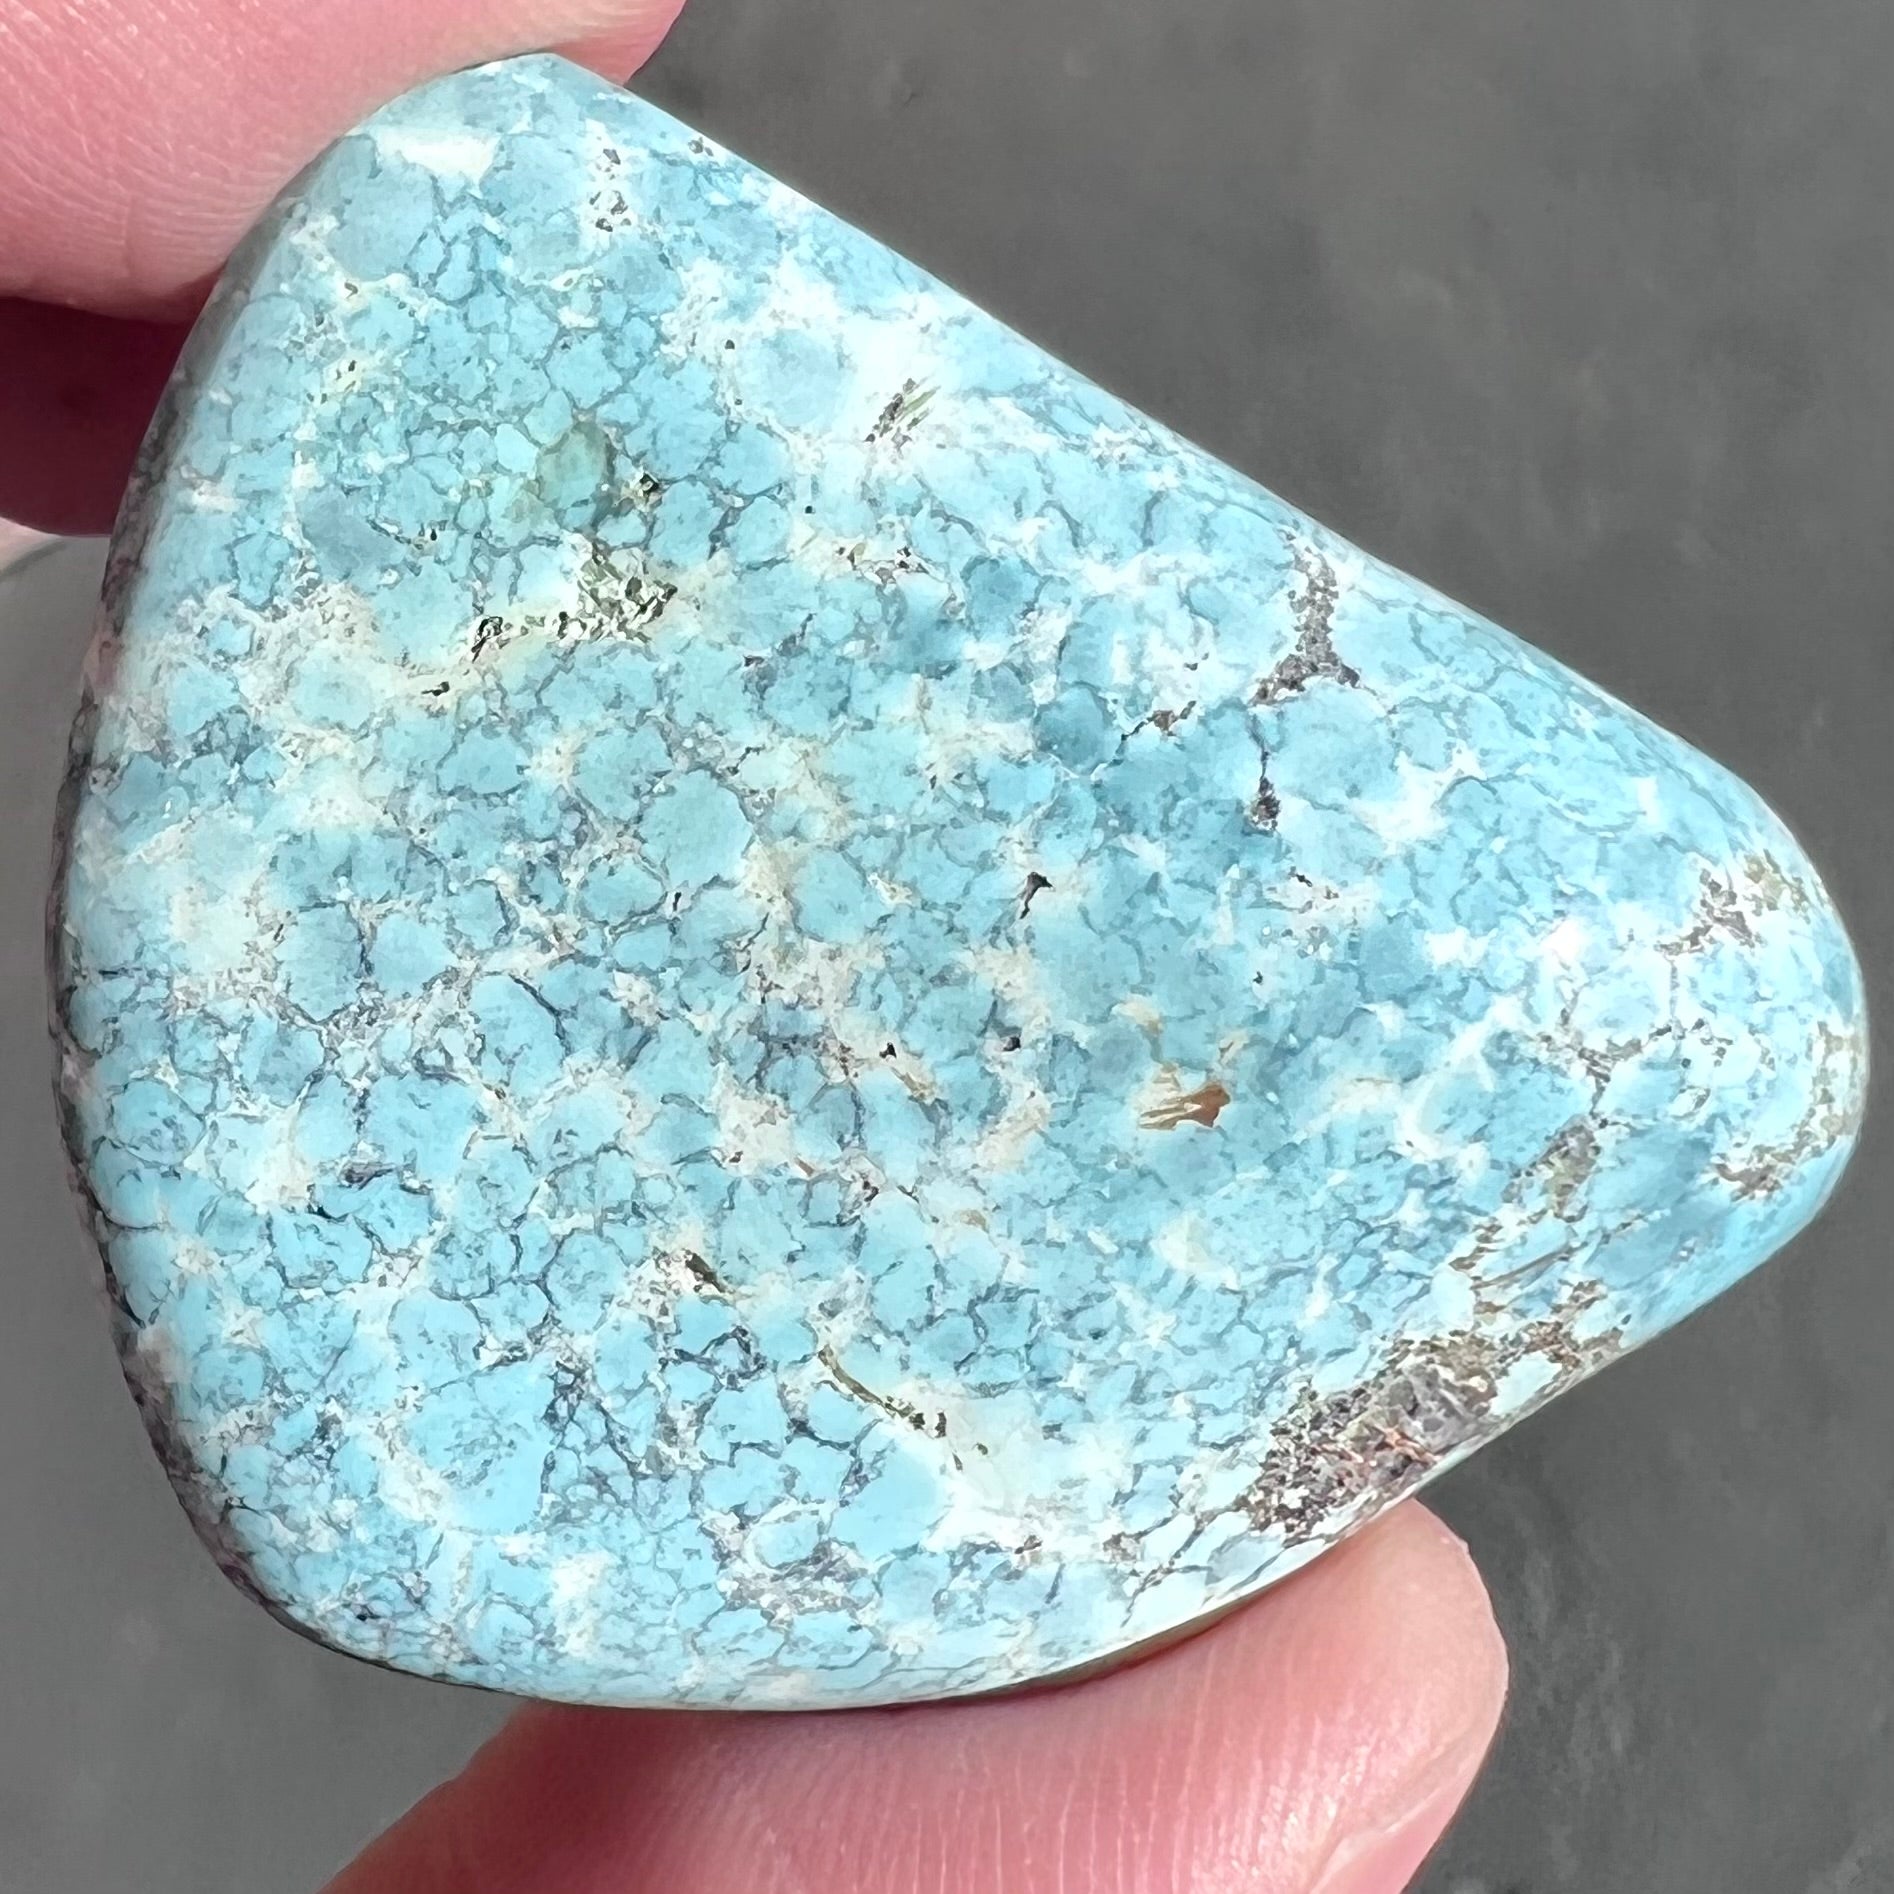 Loose light blue turquoise stone with gray matrix from Baja California, Mexico.